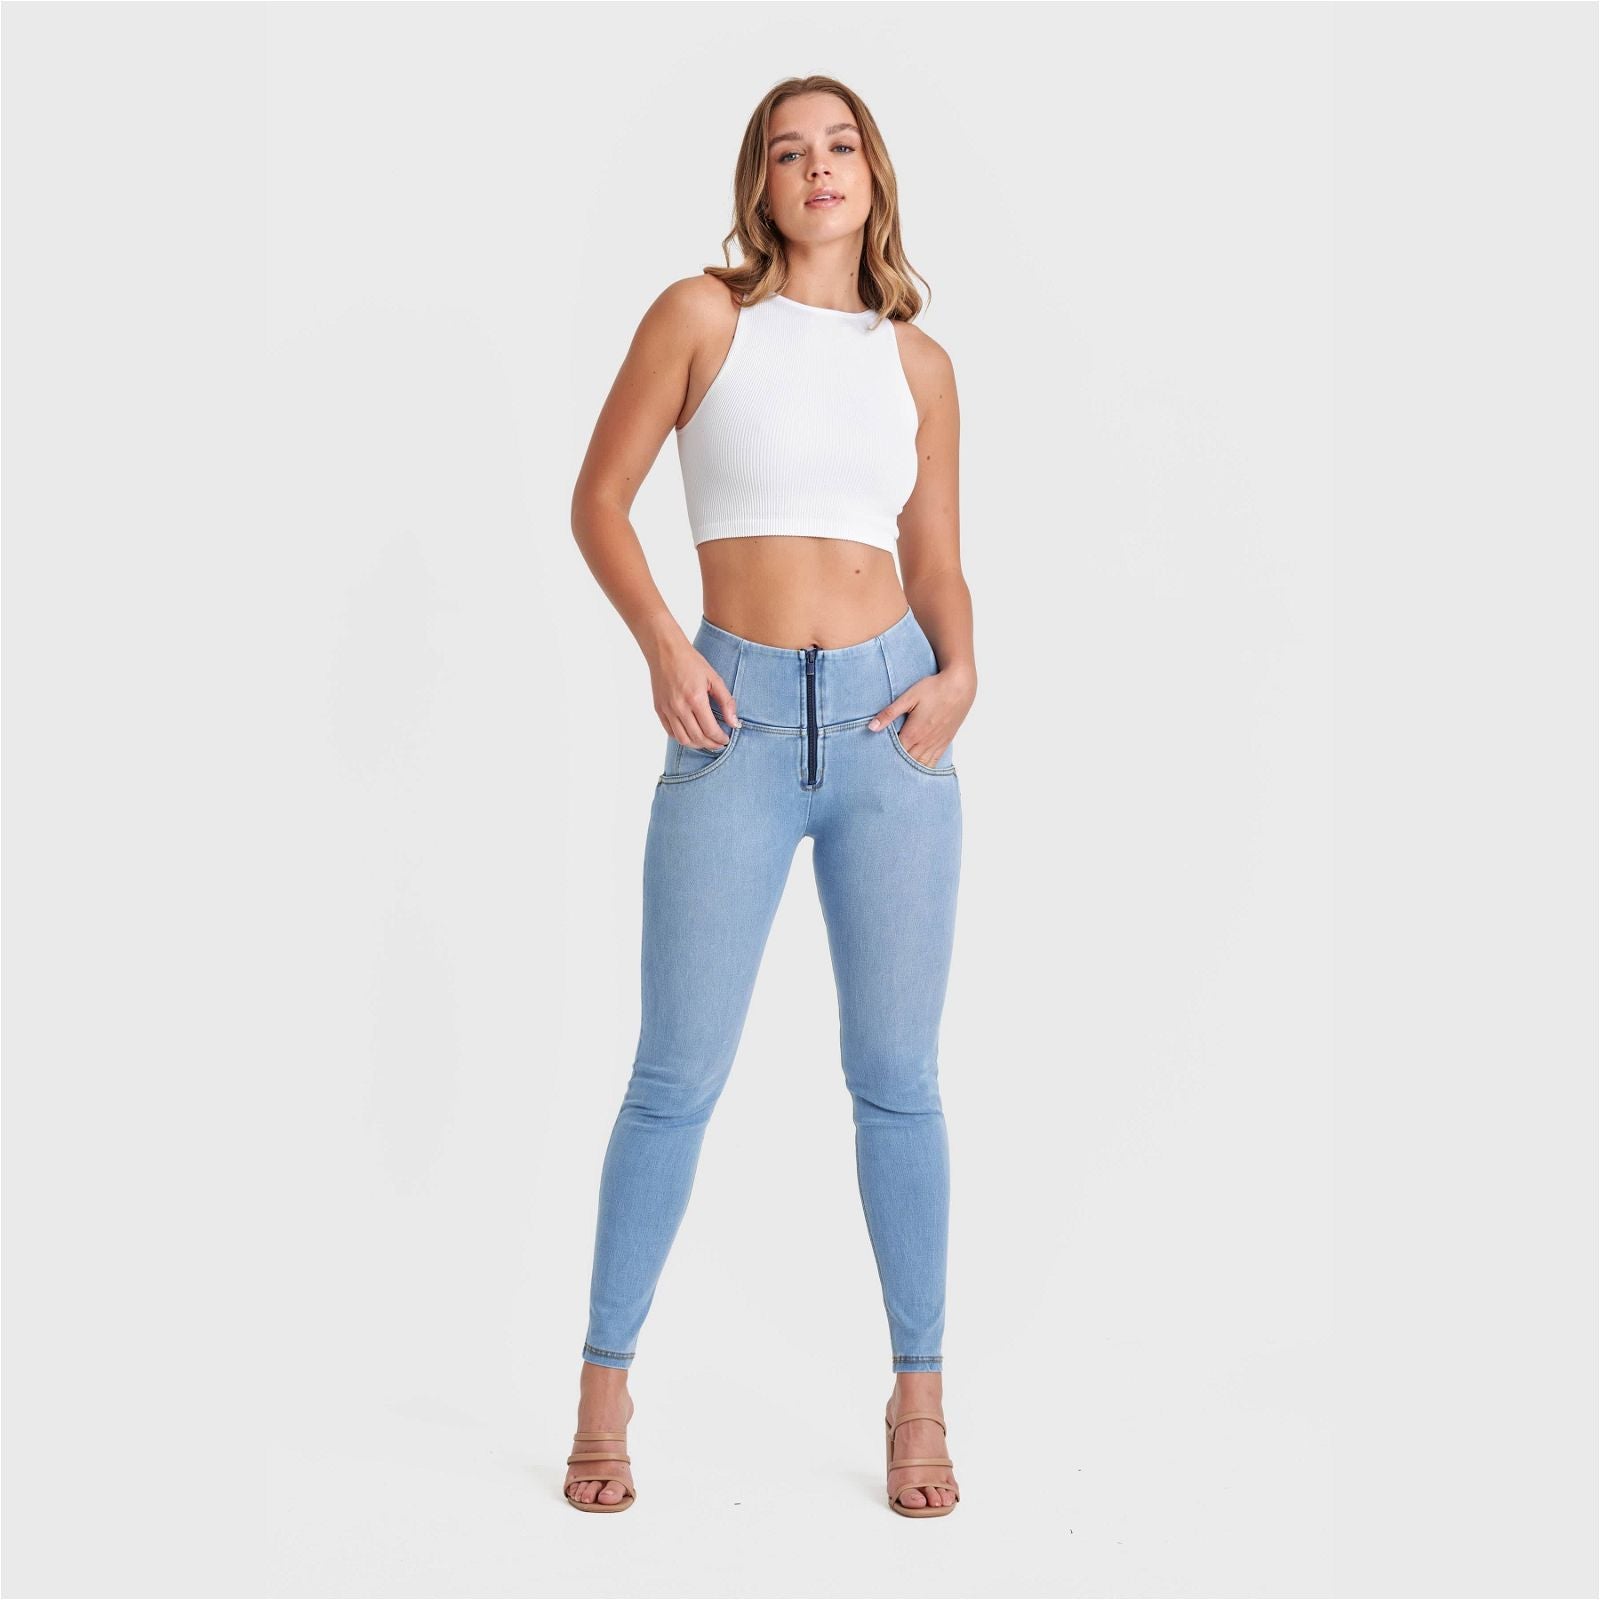 WR.UP® SNUG Jeans - High Waisted - Full Length - Light Blue + Yellow Stitching 1